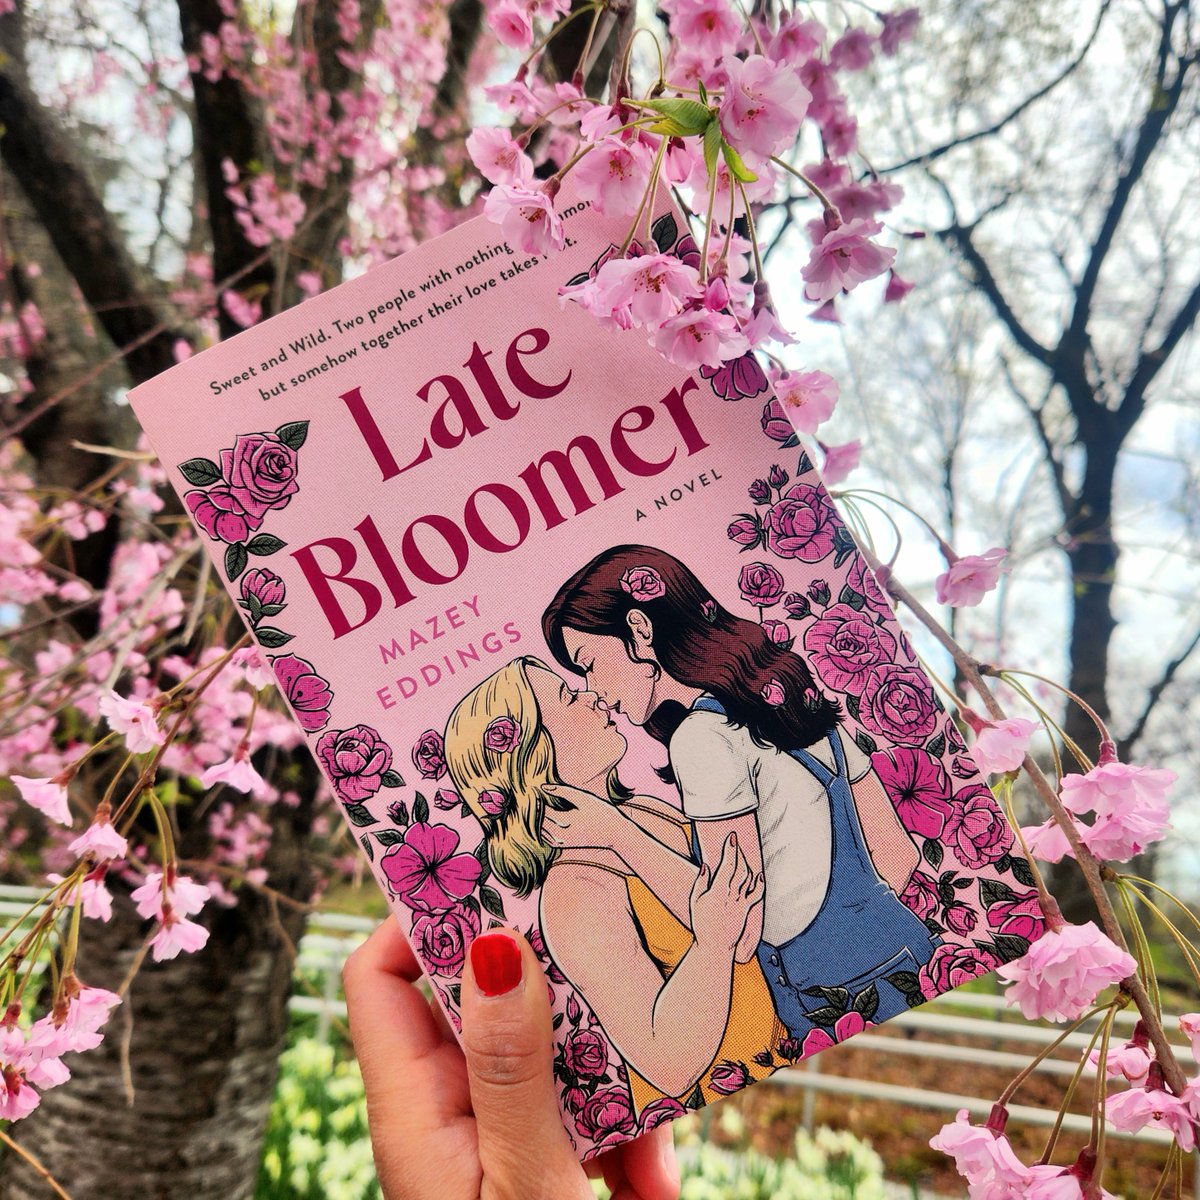 Happy #BookBirthday to LATE BLOOMER by Mazey Eddings!

Mazey Eddings's new novel has it all: a sexy, sapphic romance, an unexpected co-habitation between a grumpy/sunshine duo, and tender-hearted moments that'll make you swoon. bit.ly/3PFiGVj